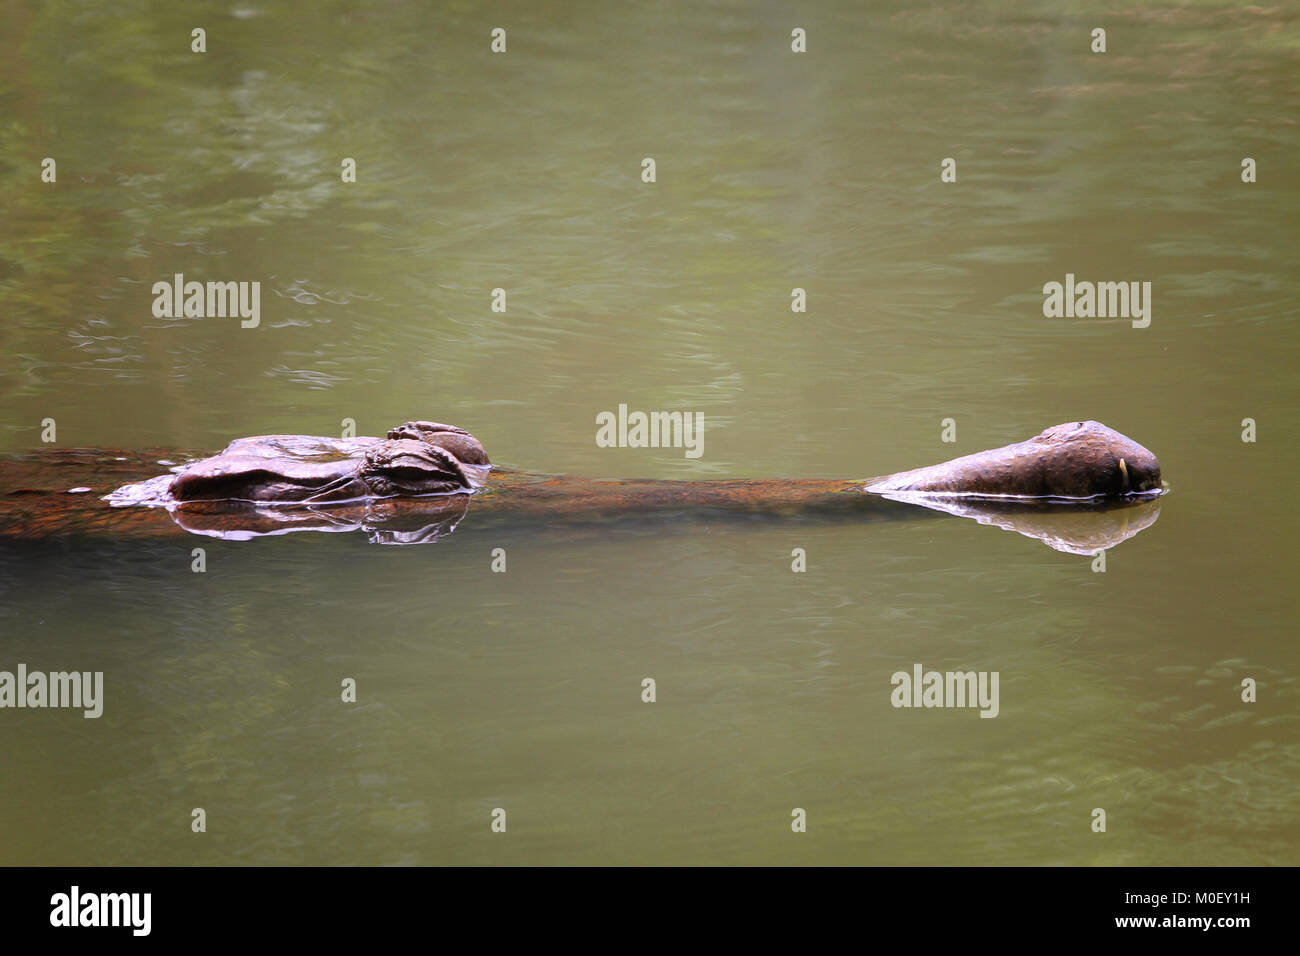 Partially submerged crocodile in a river Stock Photo